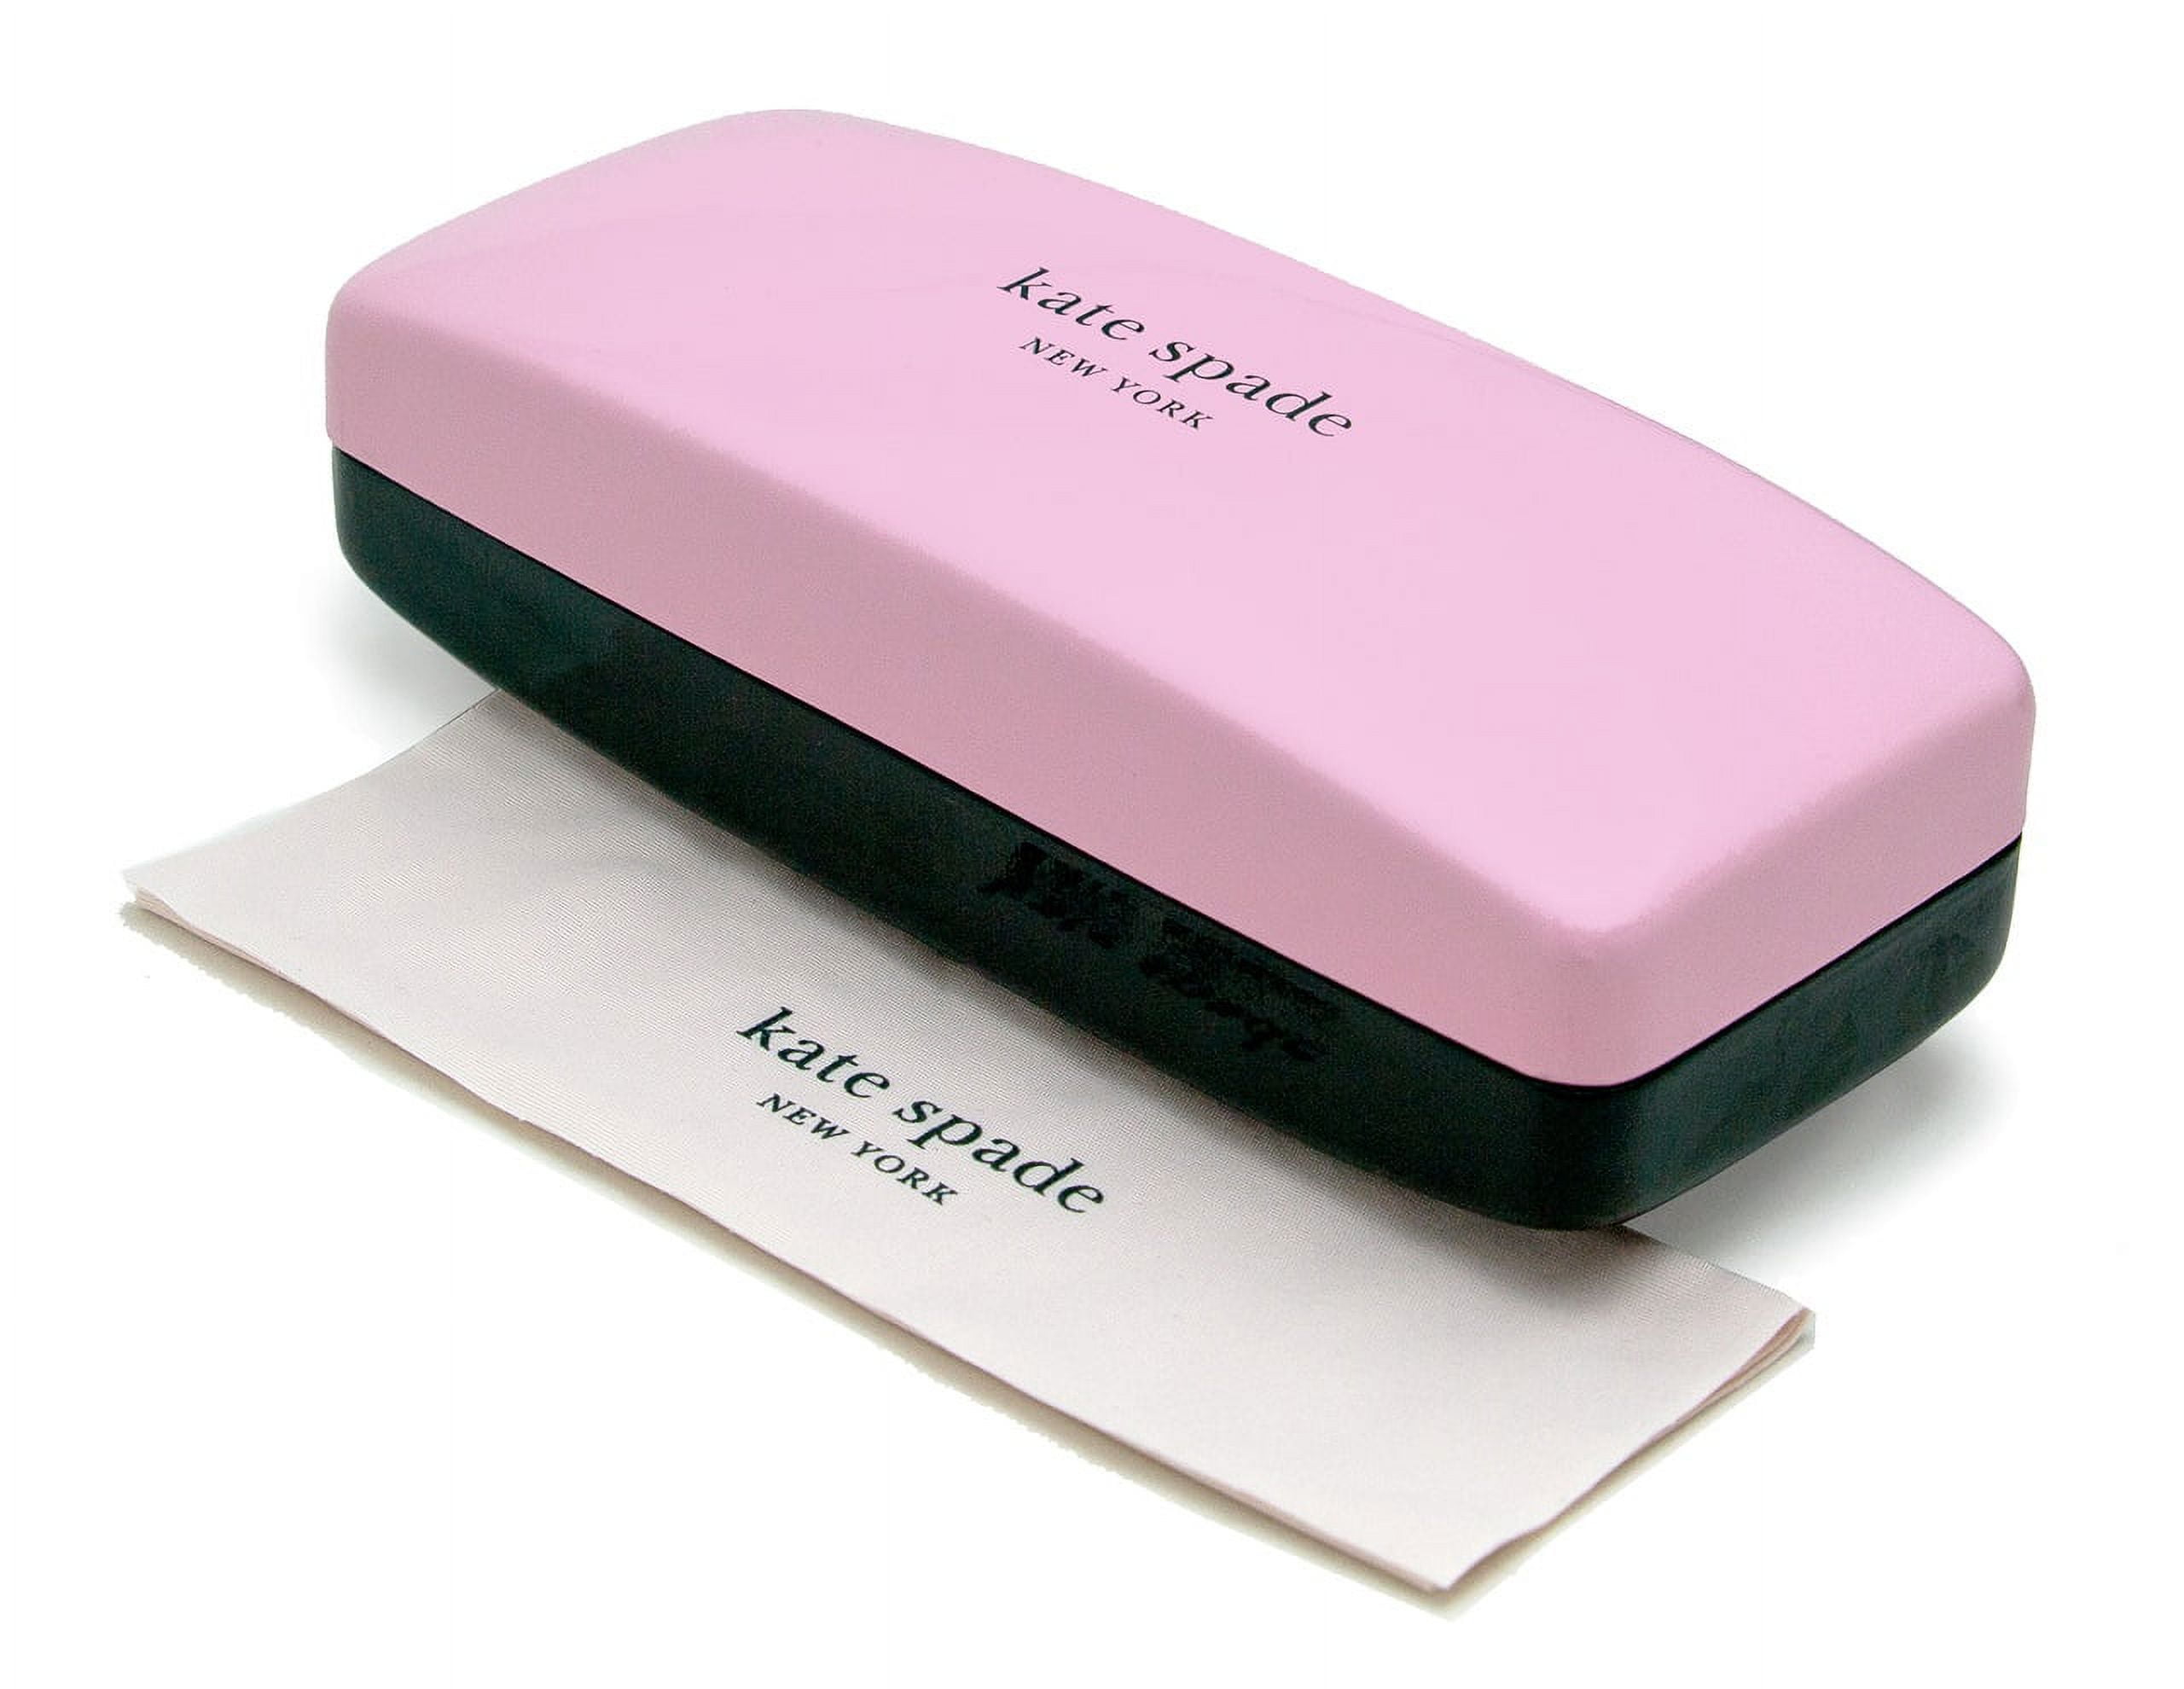 NEW Kate Spade New York Reading Glasses Case Pink/Green (6.25x2.75x1.80) NEW